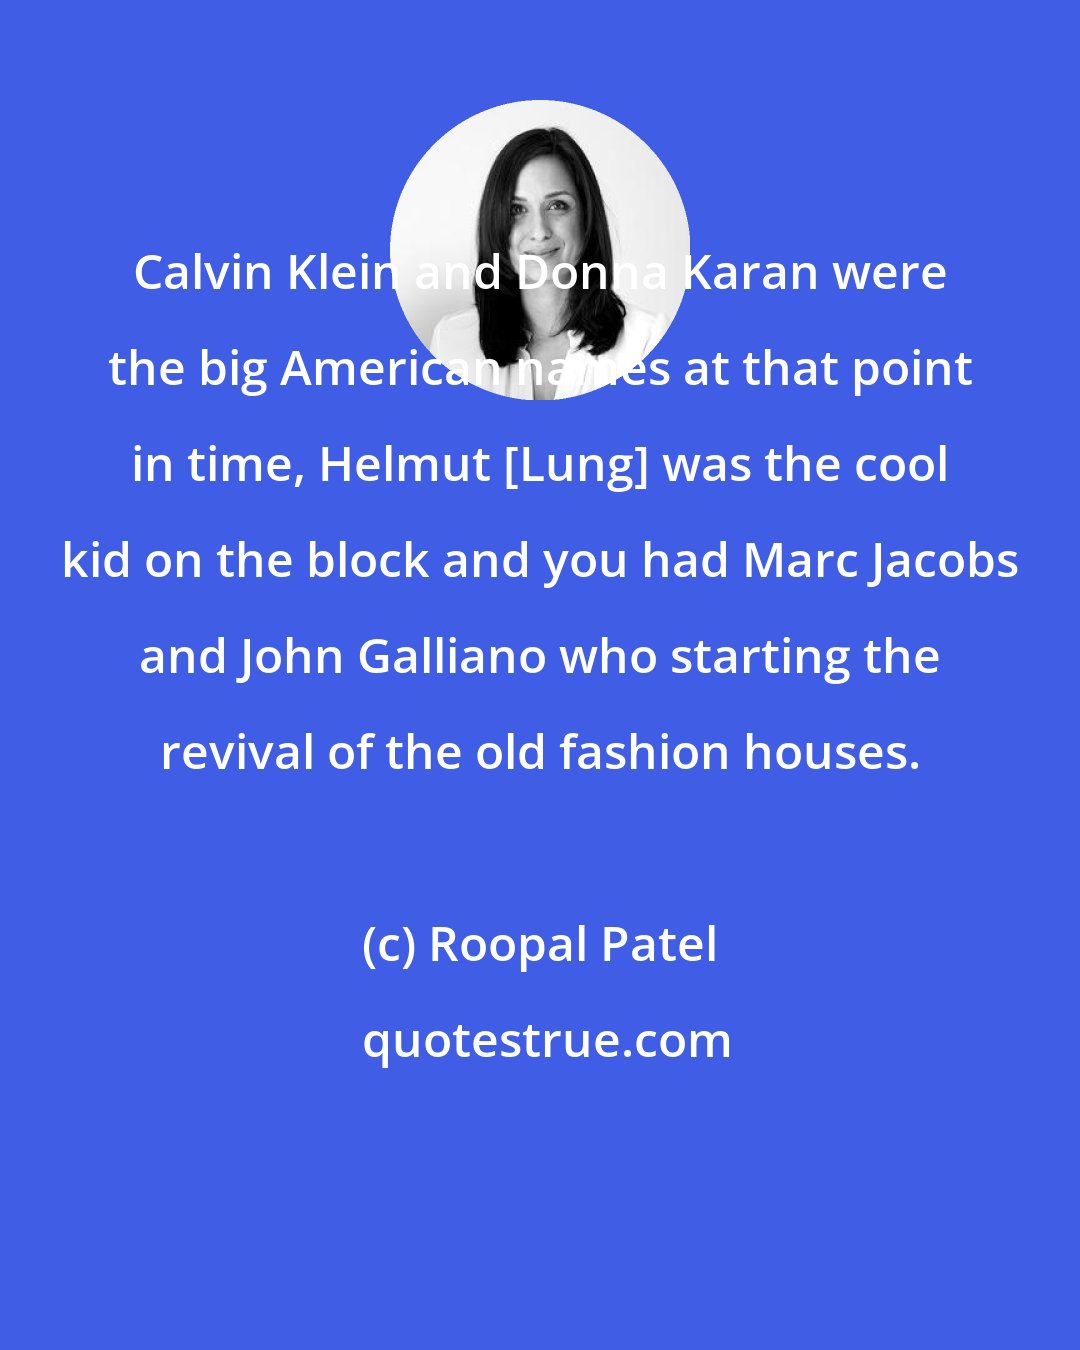 Roopal Patel: Calvin Klein and Donna Karan were the big American names at that point in time, Helmut [Lung] was the cool kid on the block and you had Marc Jacobs and John Galliano who starting the revival of the old fashion houses.